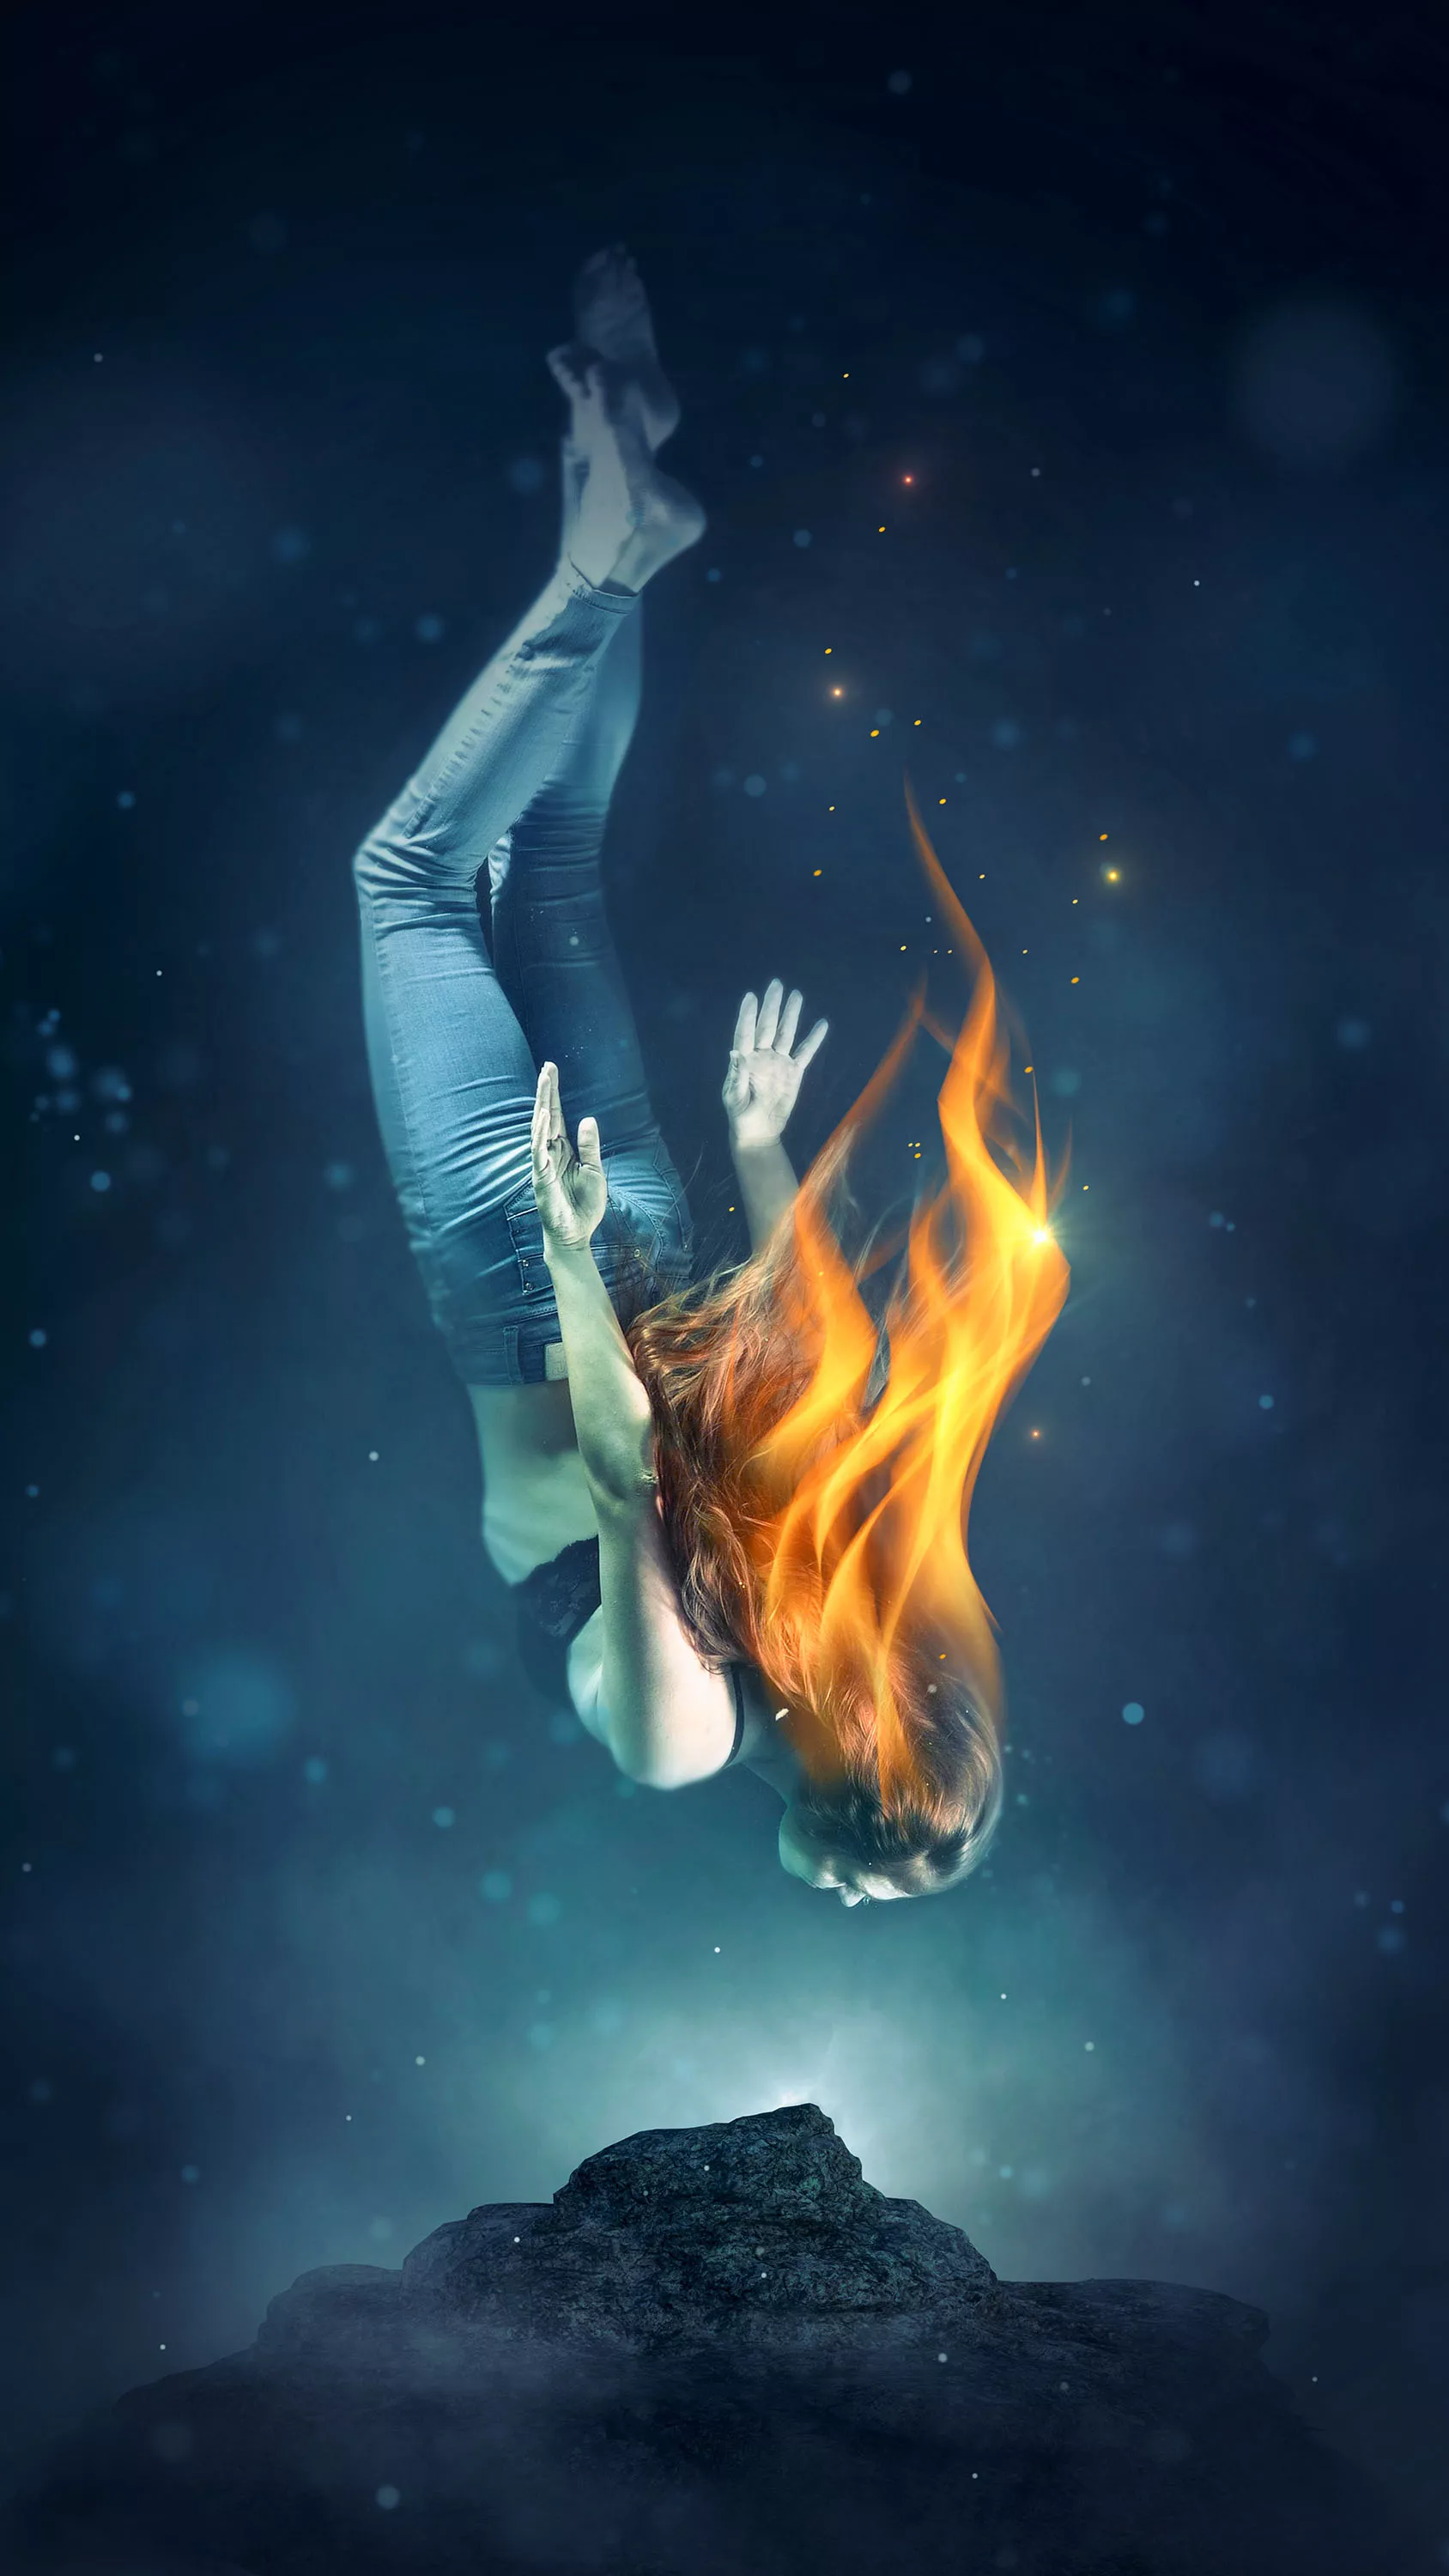 thumb for Water Fire Flame Diving Girl Wallpaper